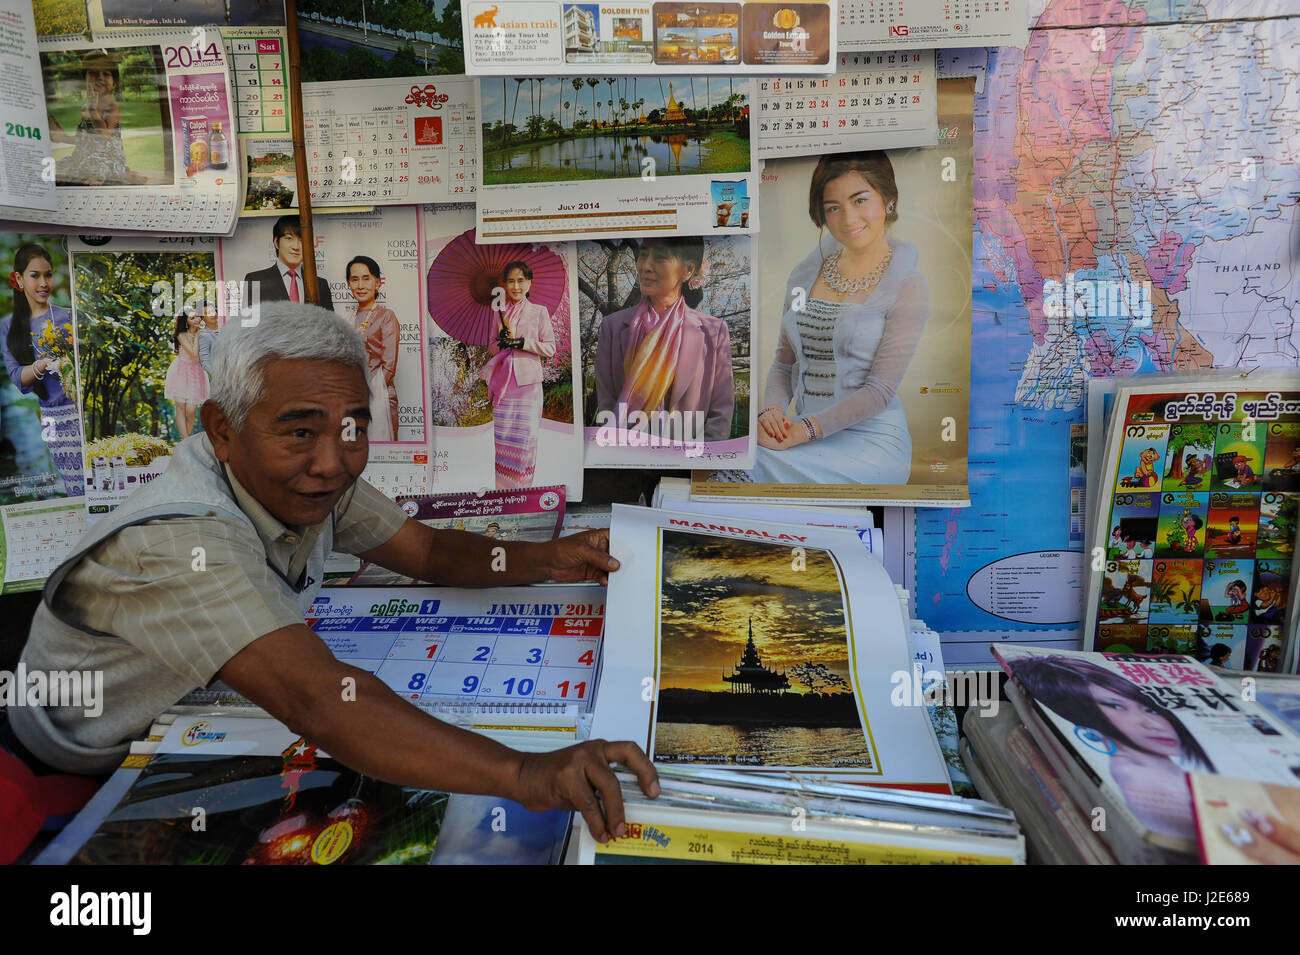 20.12.2013, Yangon, Republic of the Union of Myanmar, Asia - A street vendor sells calenders and posters with the picture of Aung San Suu Kyi. Stock Photo